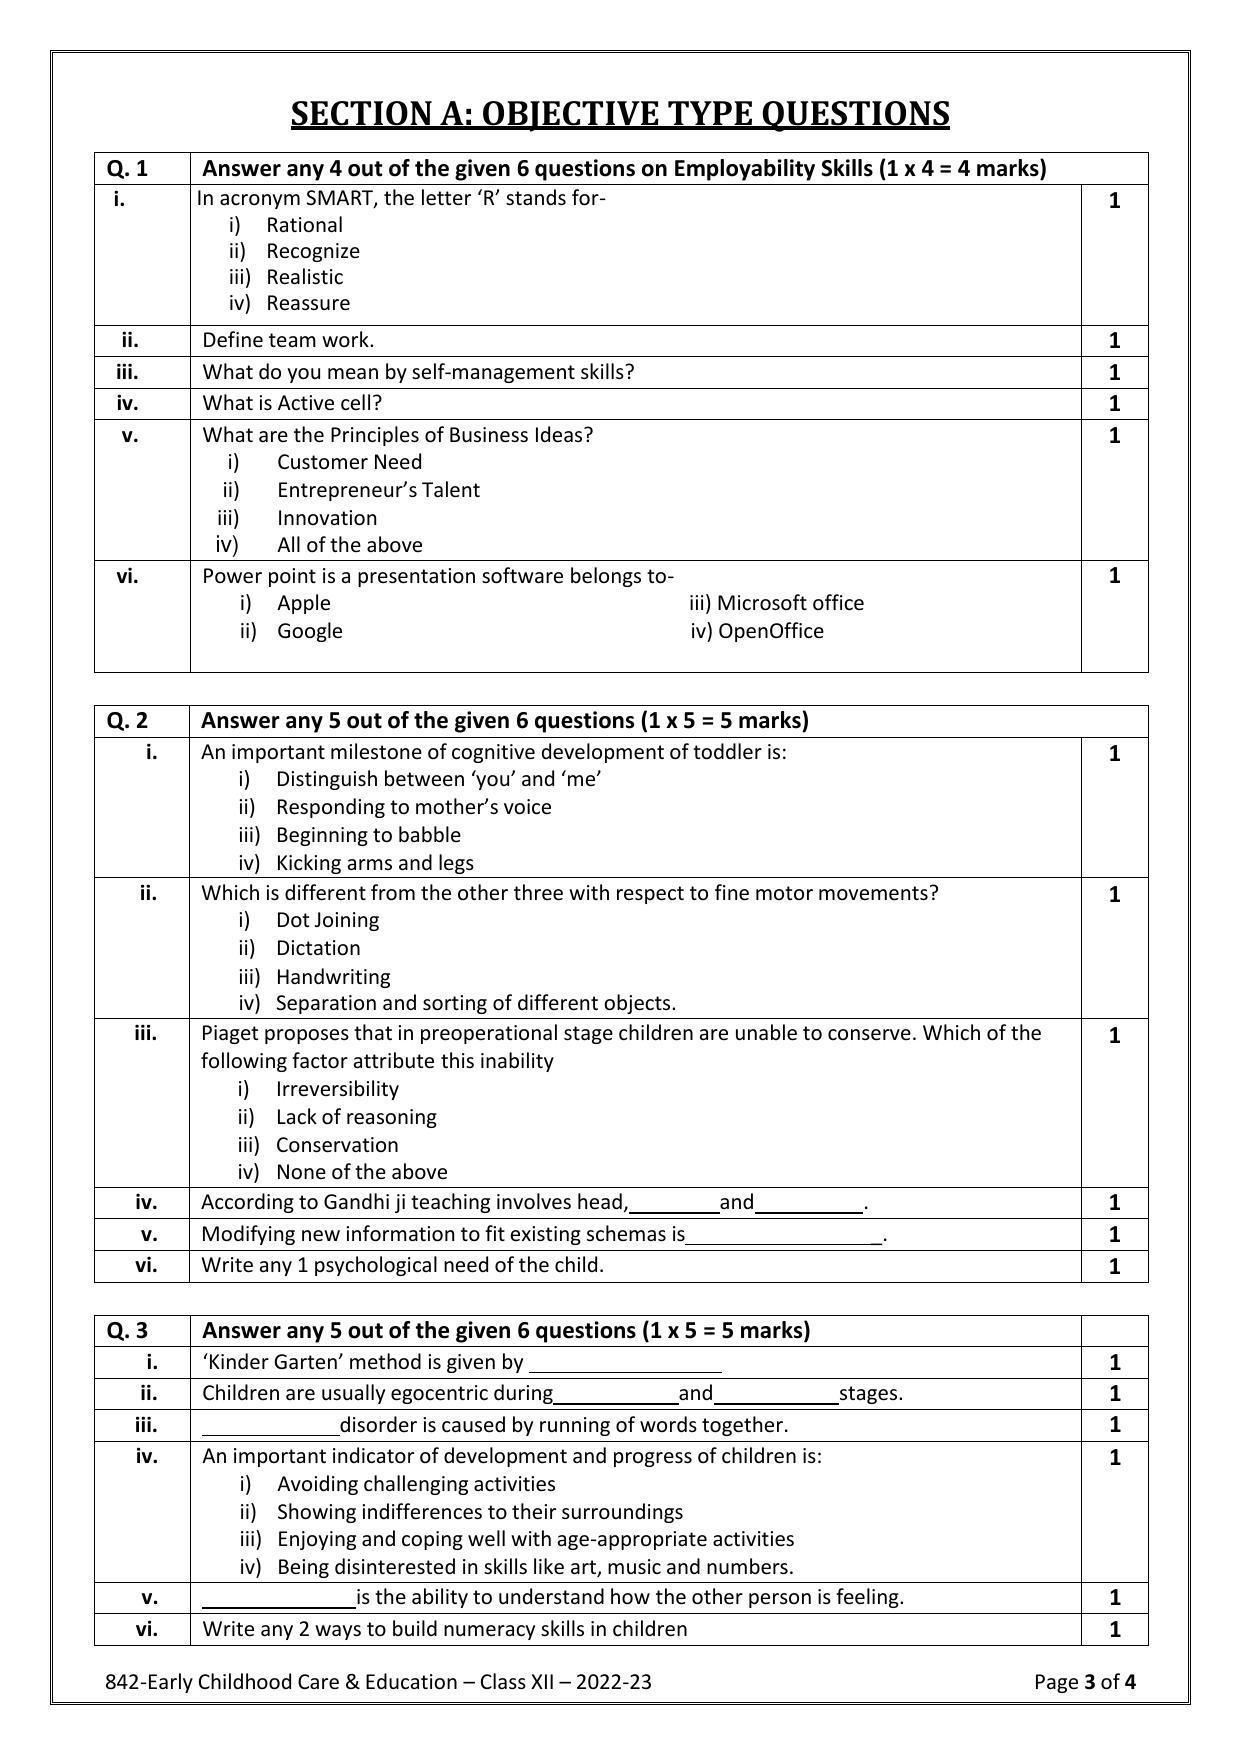 CBSE Class 12 Early Childhood Care & Education (Skill Education) Sample Papers 2023 - Page 3